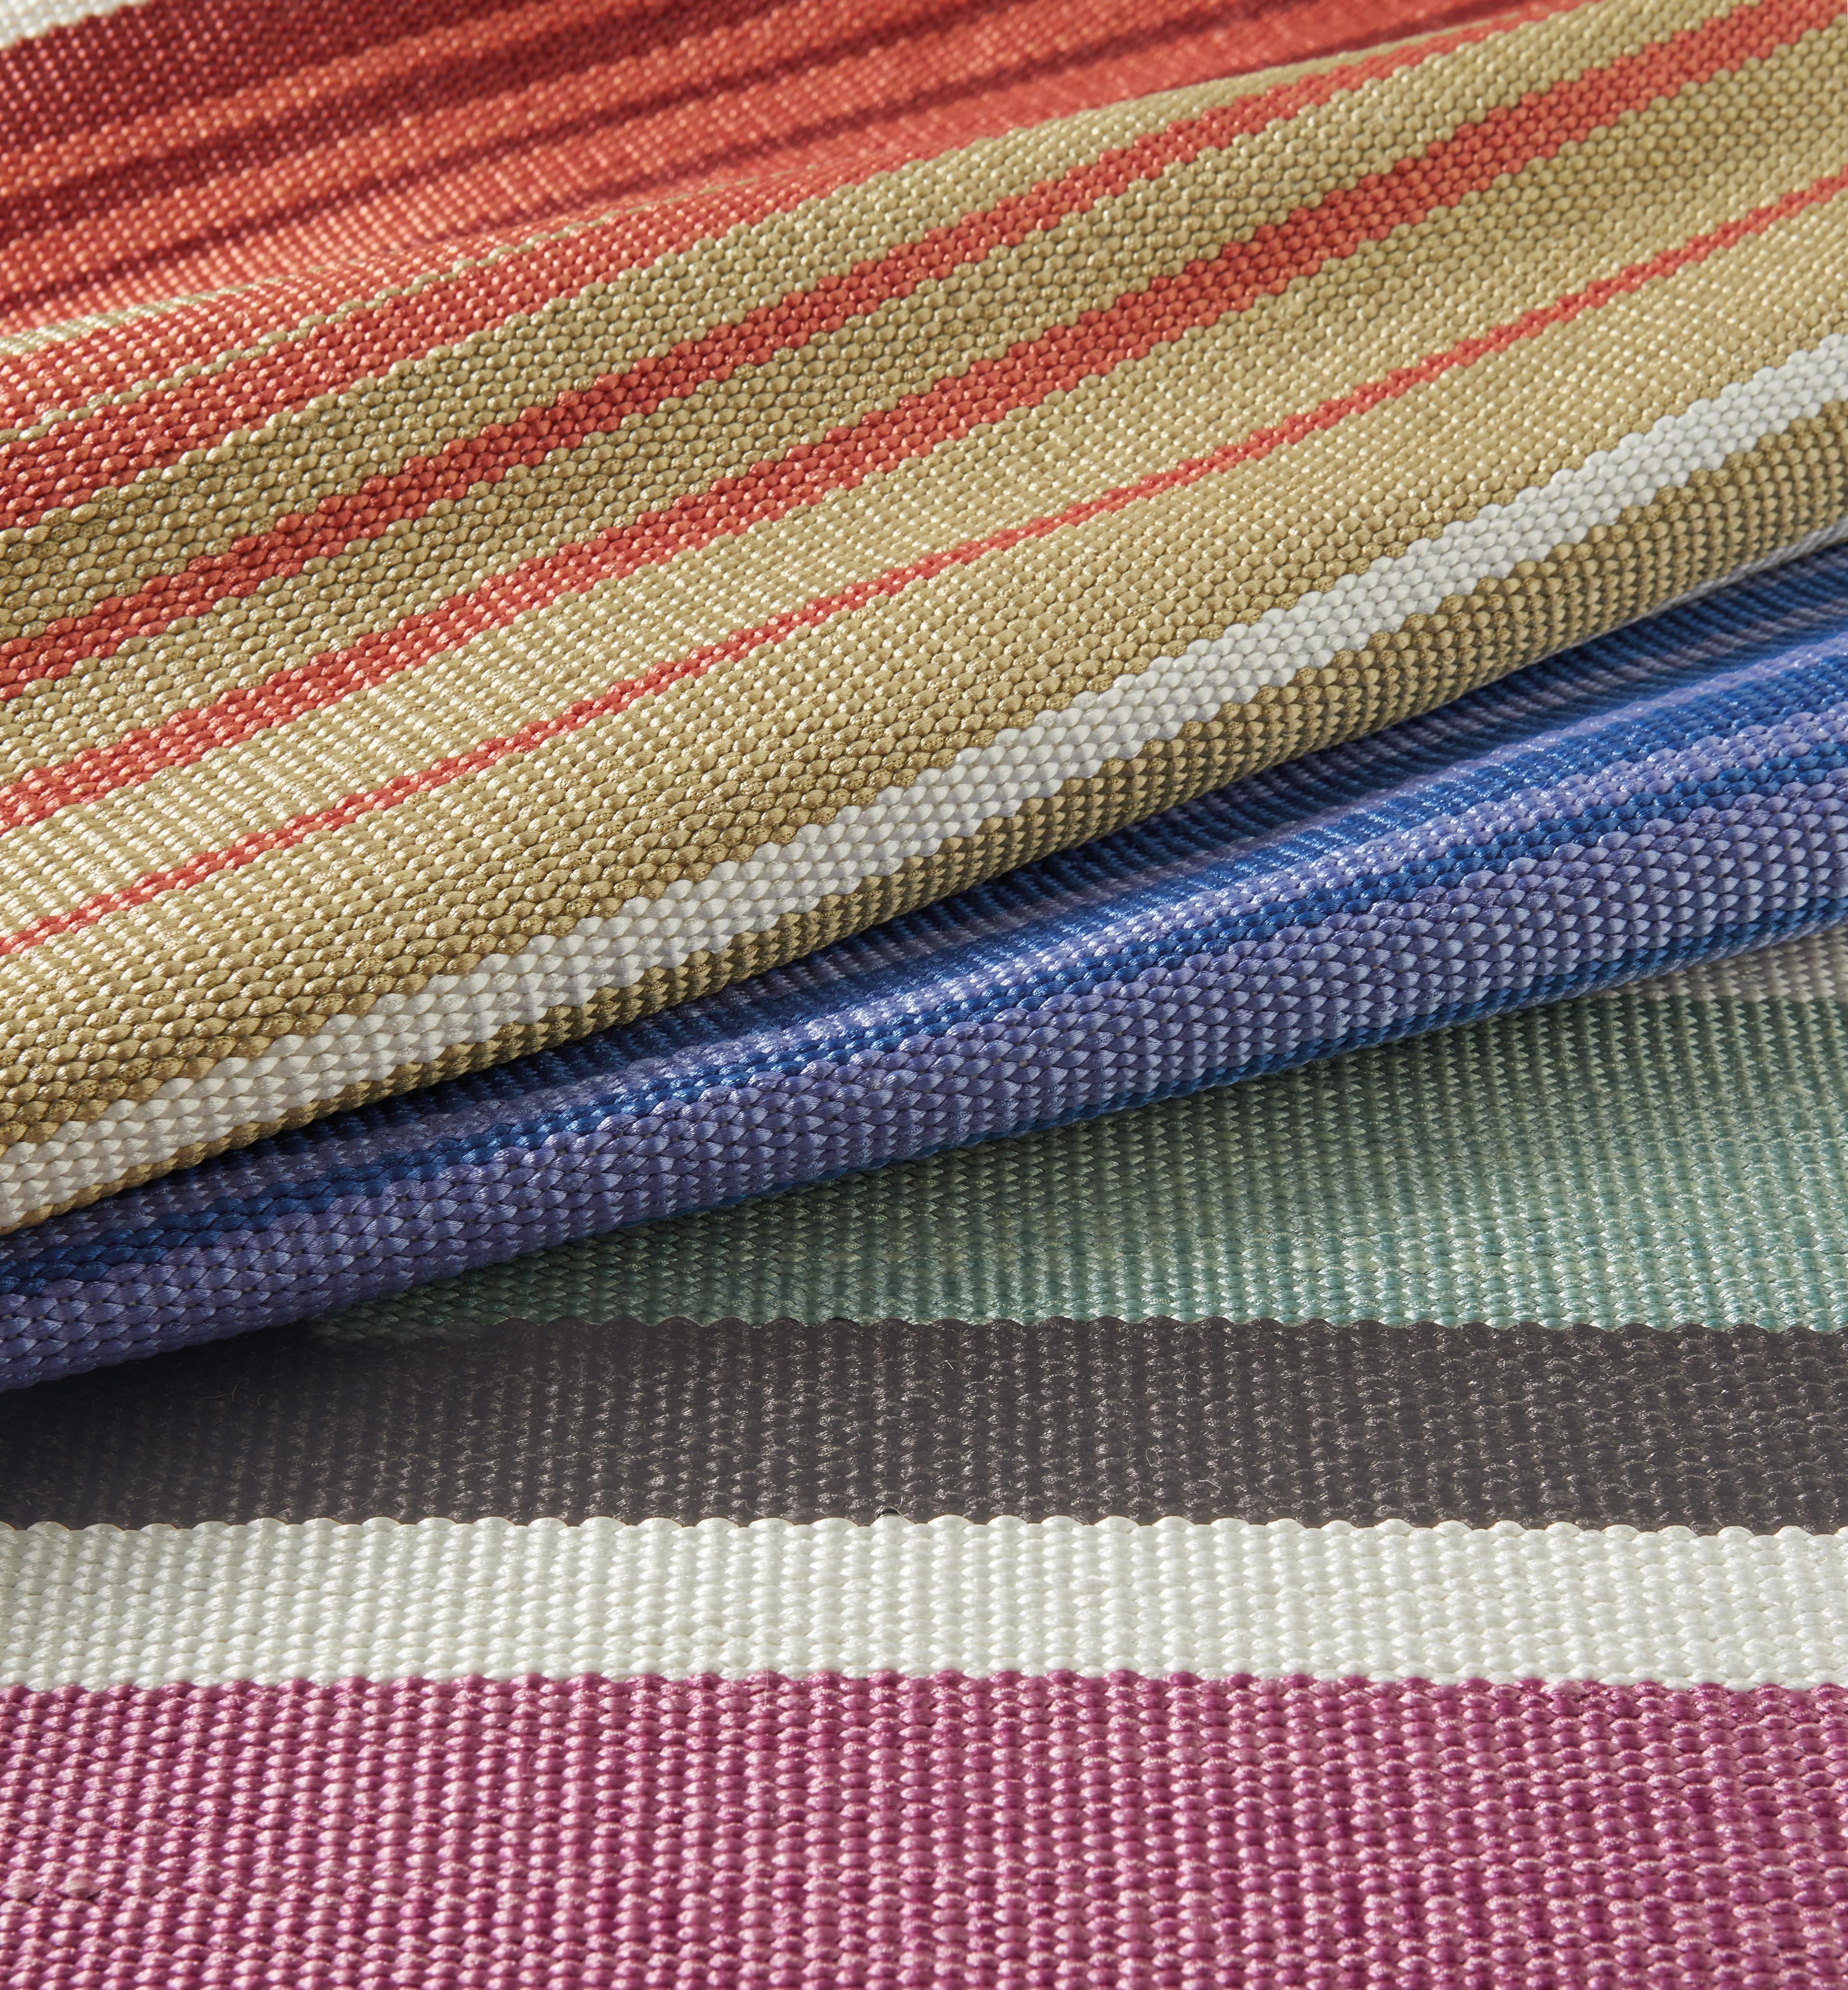 Missoni Home's outdoor multi-colored striped rug; made to withstand outdoor elements
   